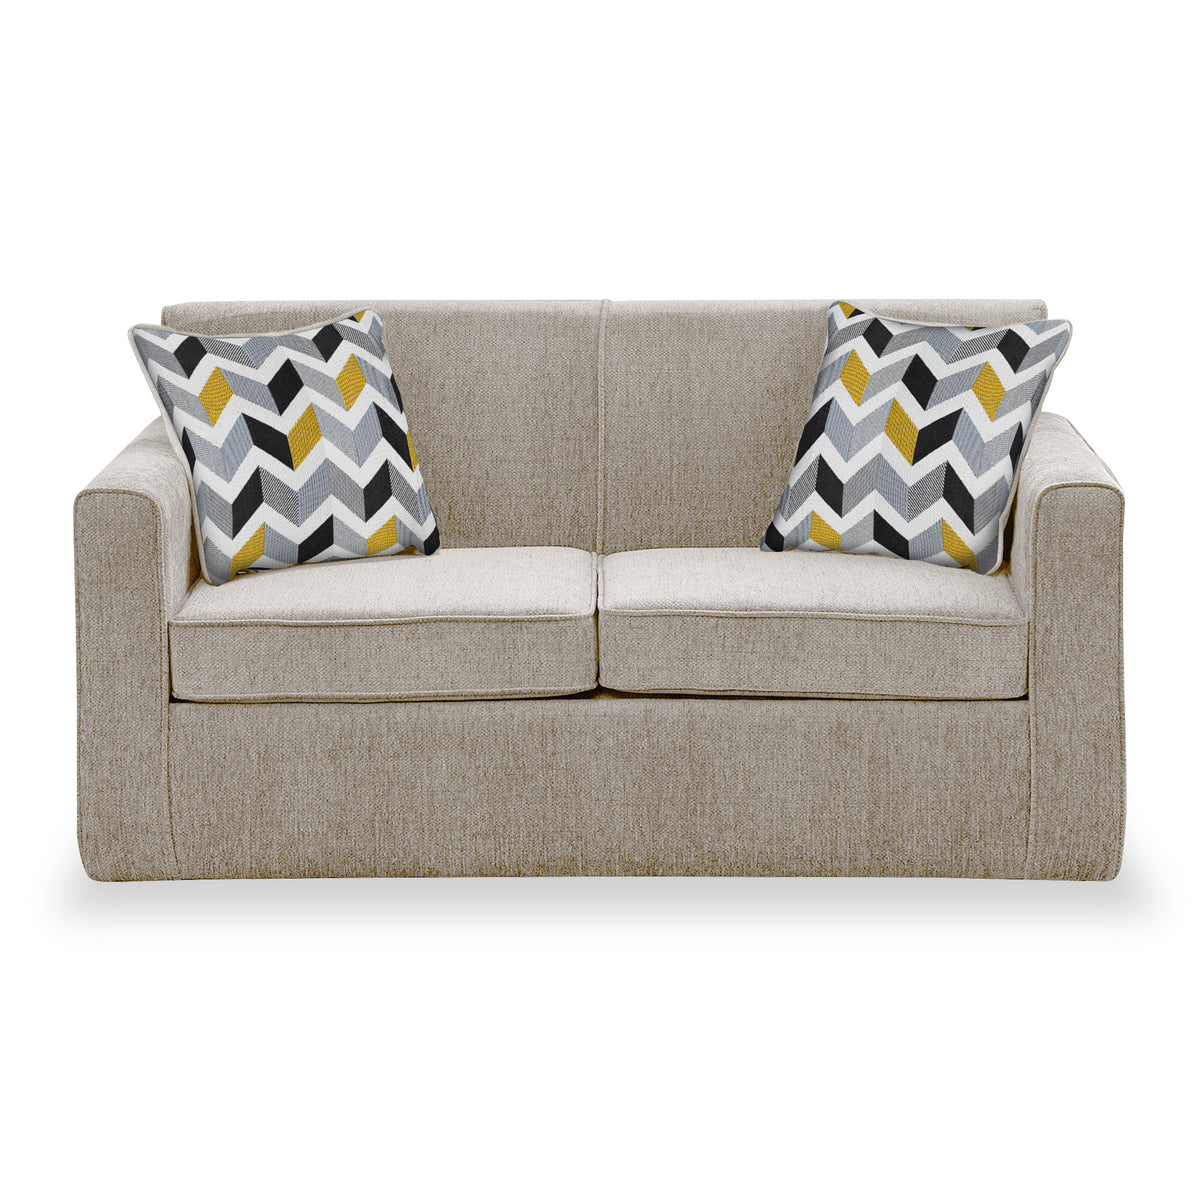 Welton Oatmeal Soft Weave 2 Seater Sofa Bed with Morelisa Mustard